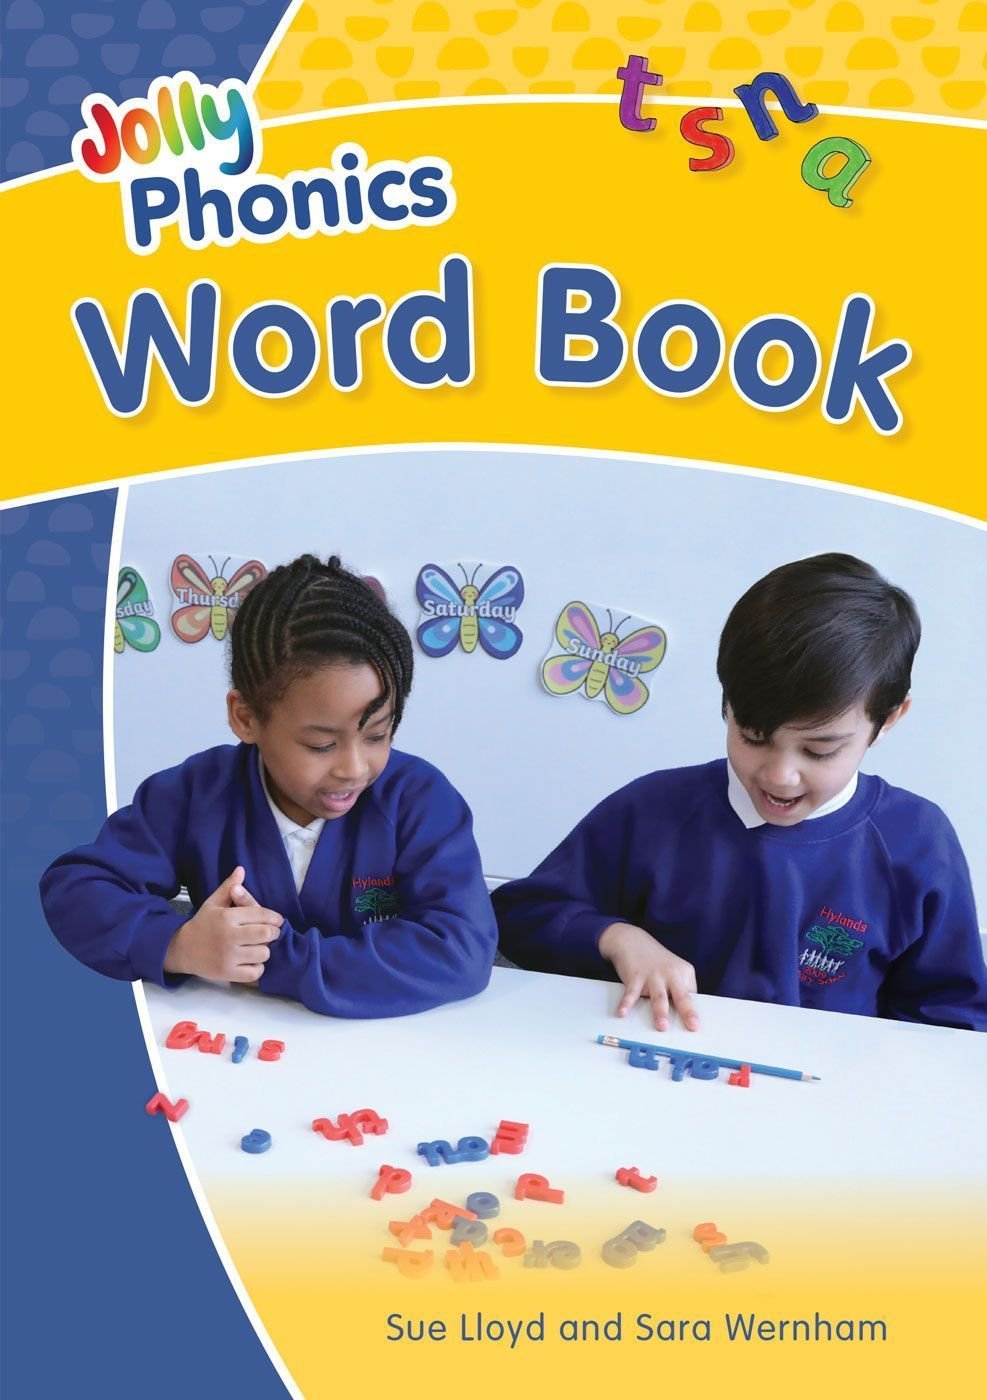 Lloyd　Phonics　Sue　Buy　Delivery　Book　by　Jolly　Free　Word　With